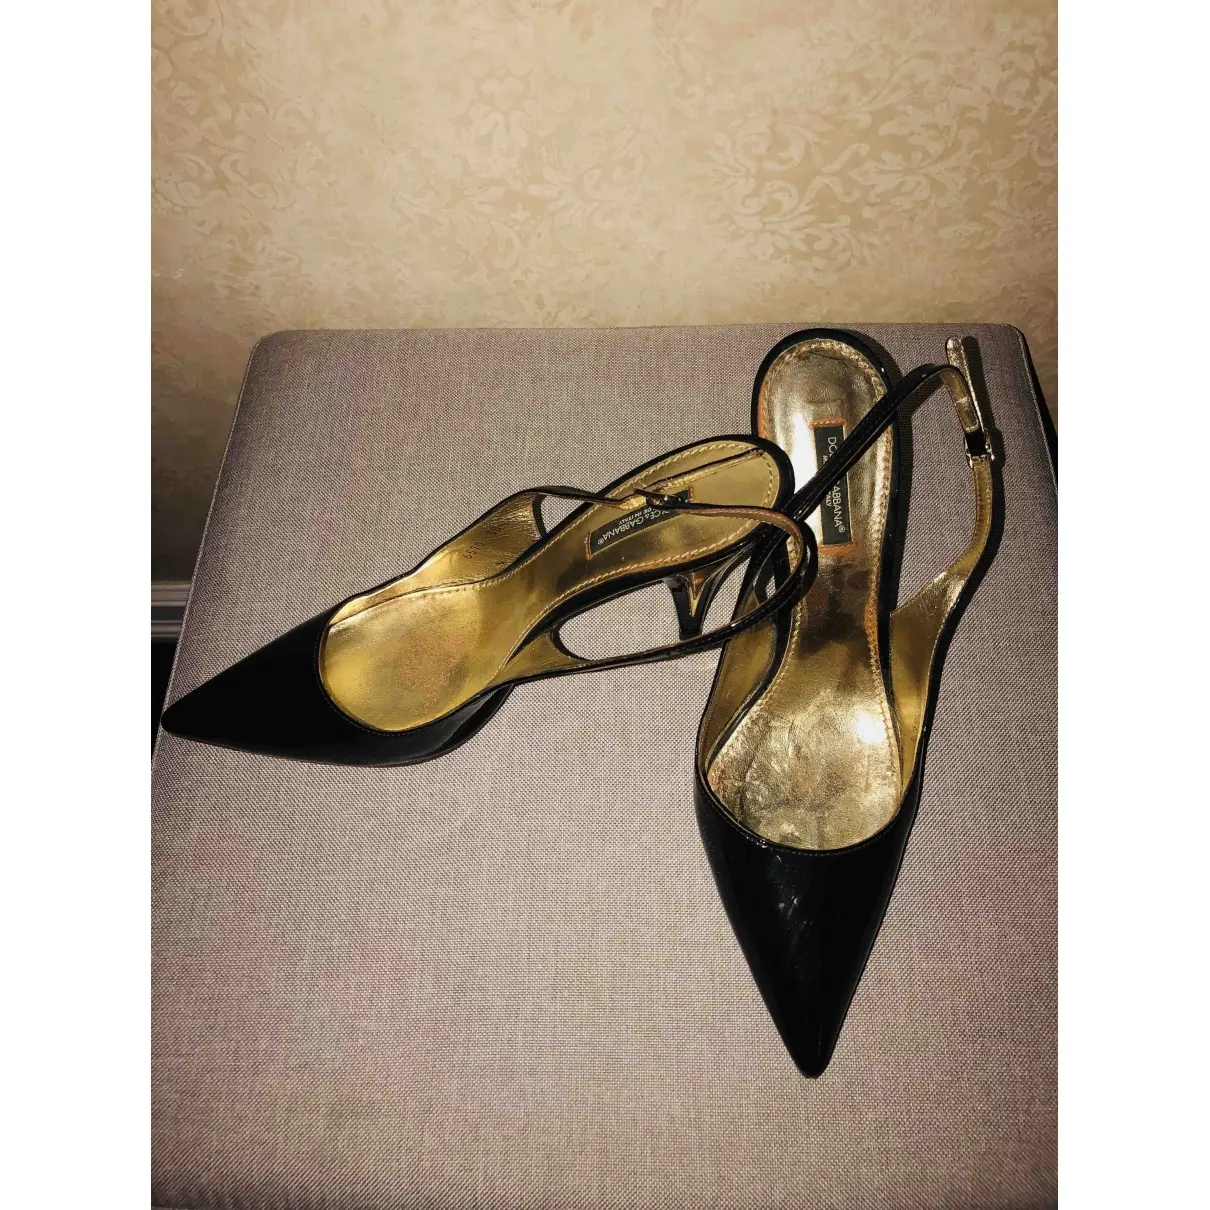 Dolce & Gabbana Patent leather heels for sale